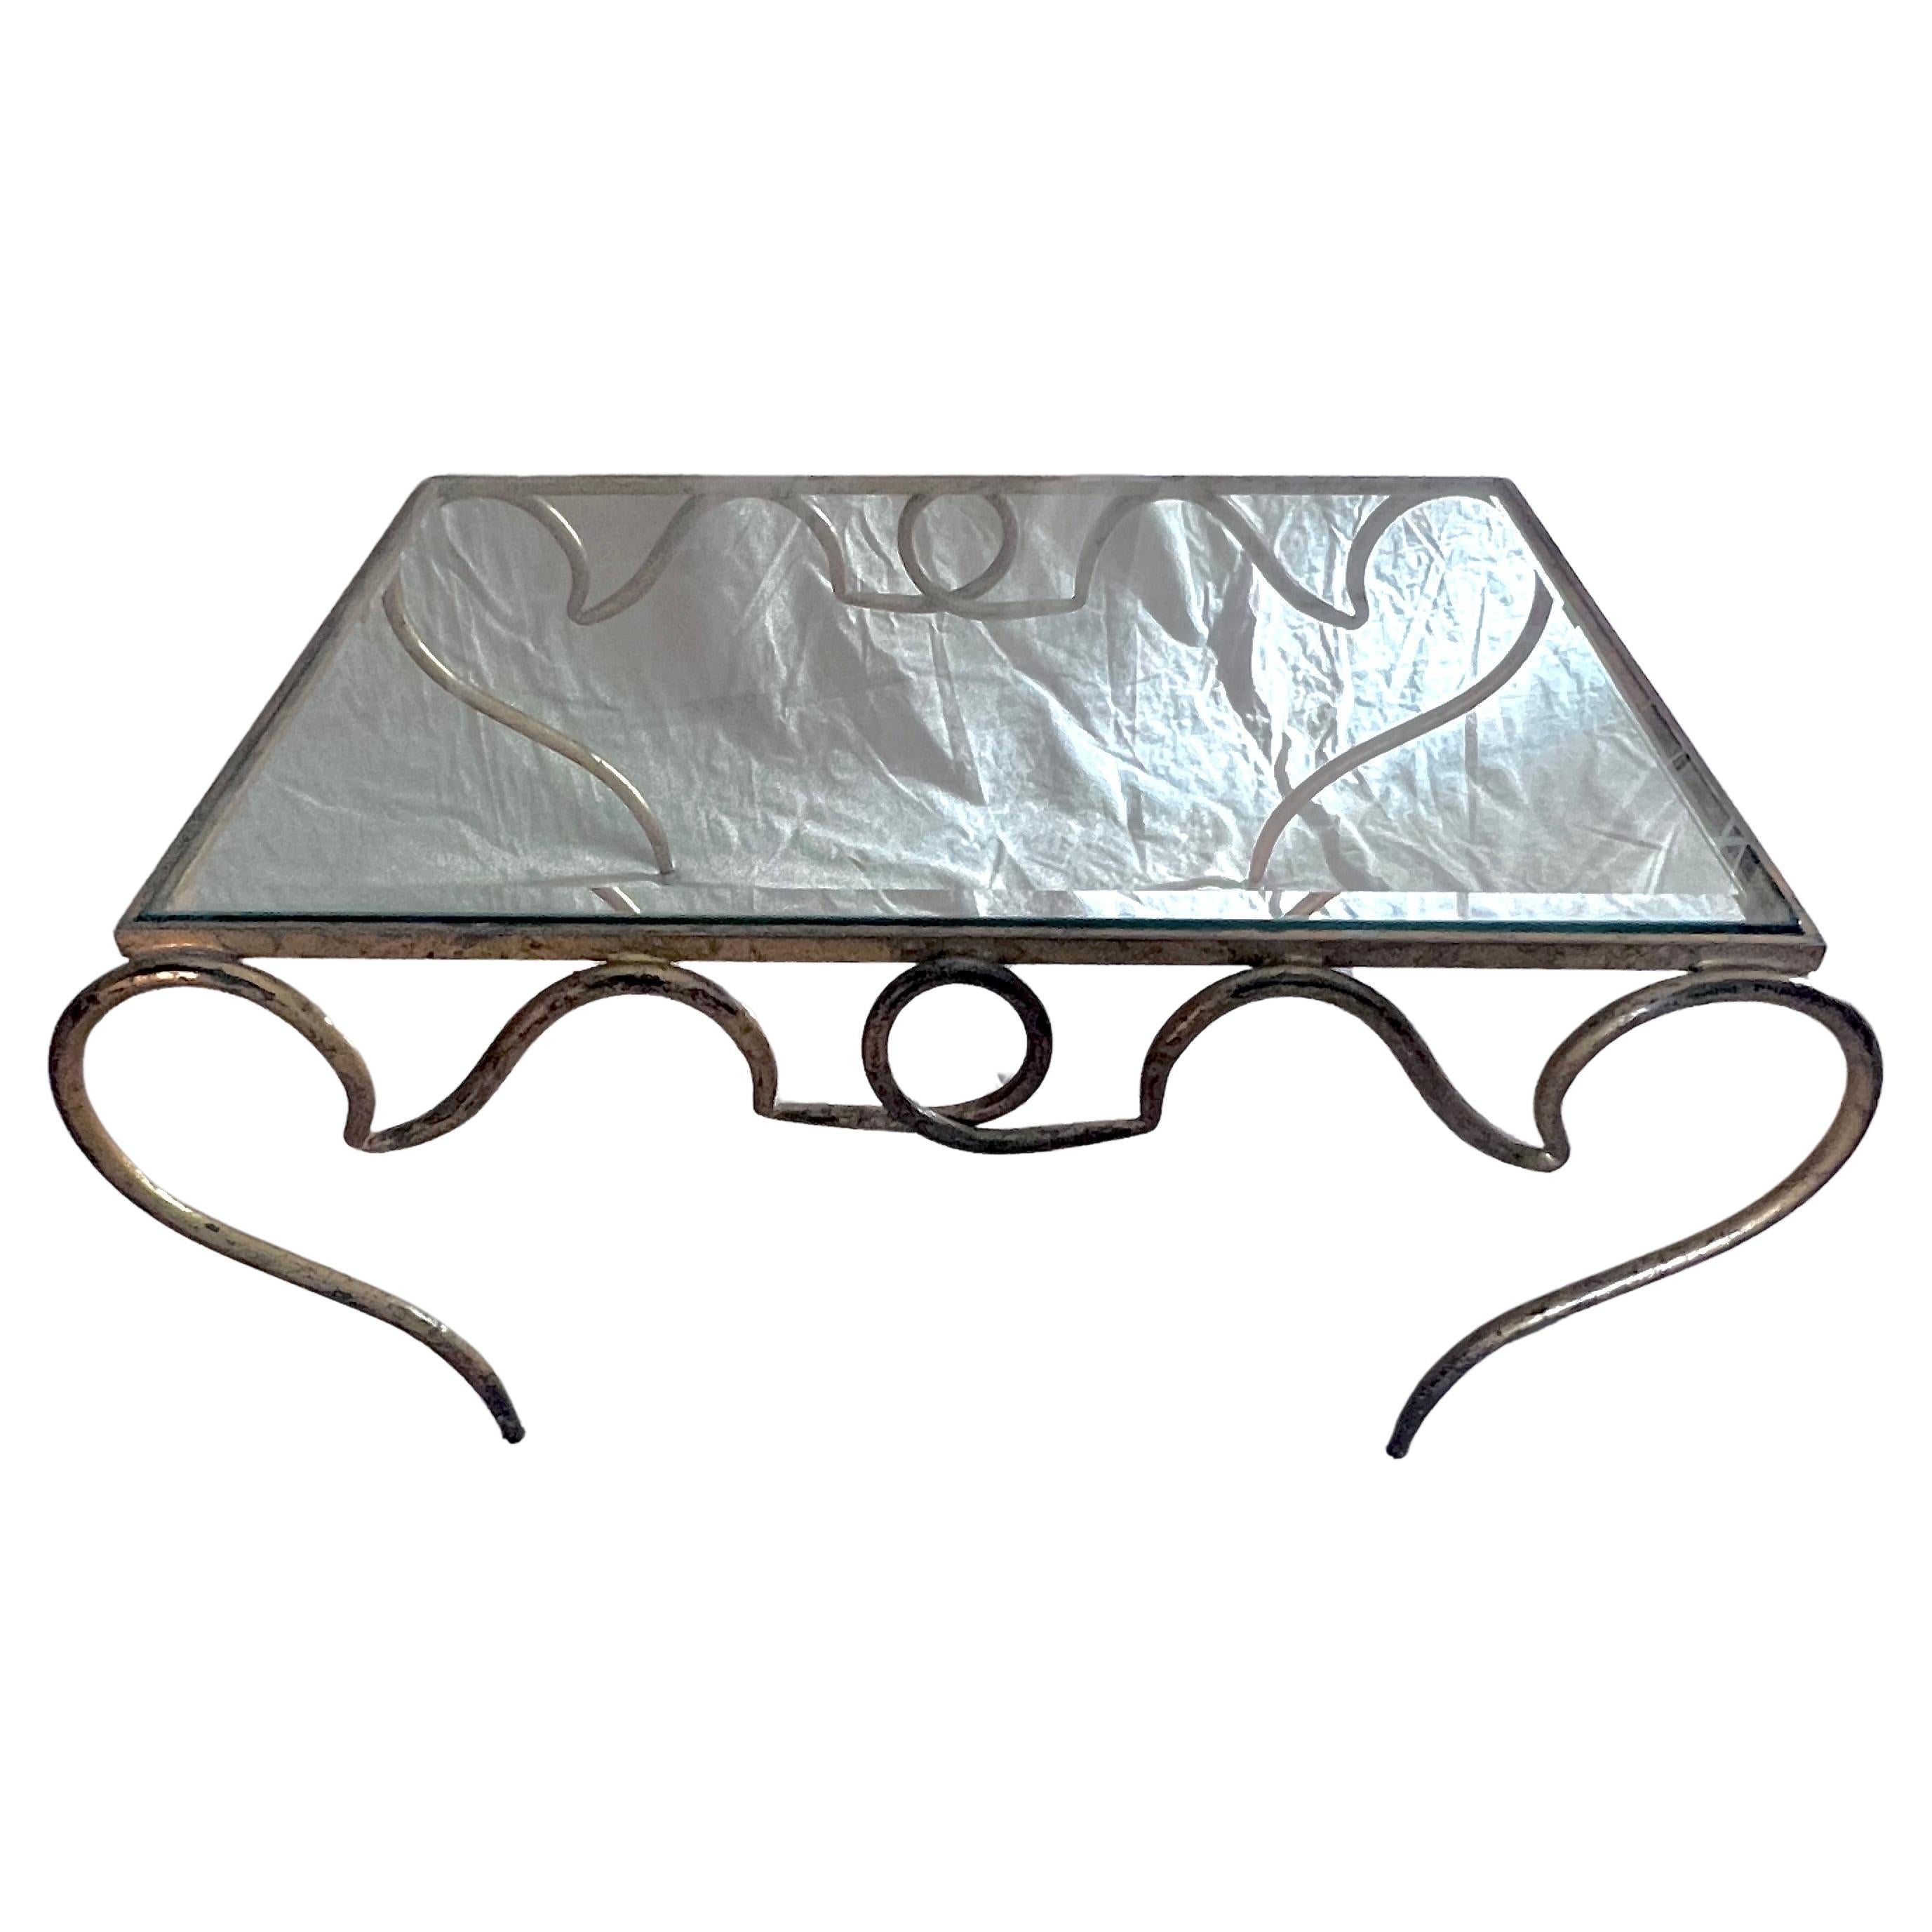 Hollywood Regency French Gilt Wrought Iron Cocktail Table by Rene Prou For Sale